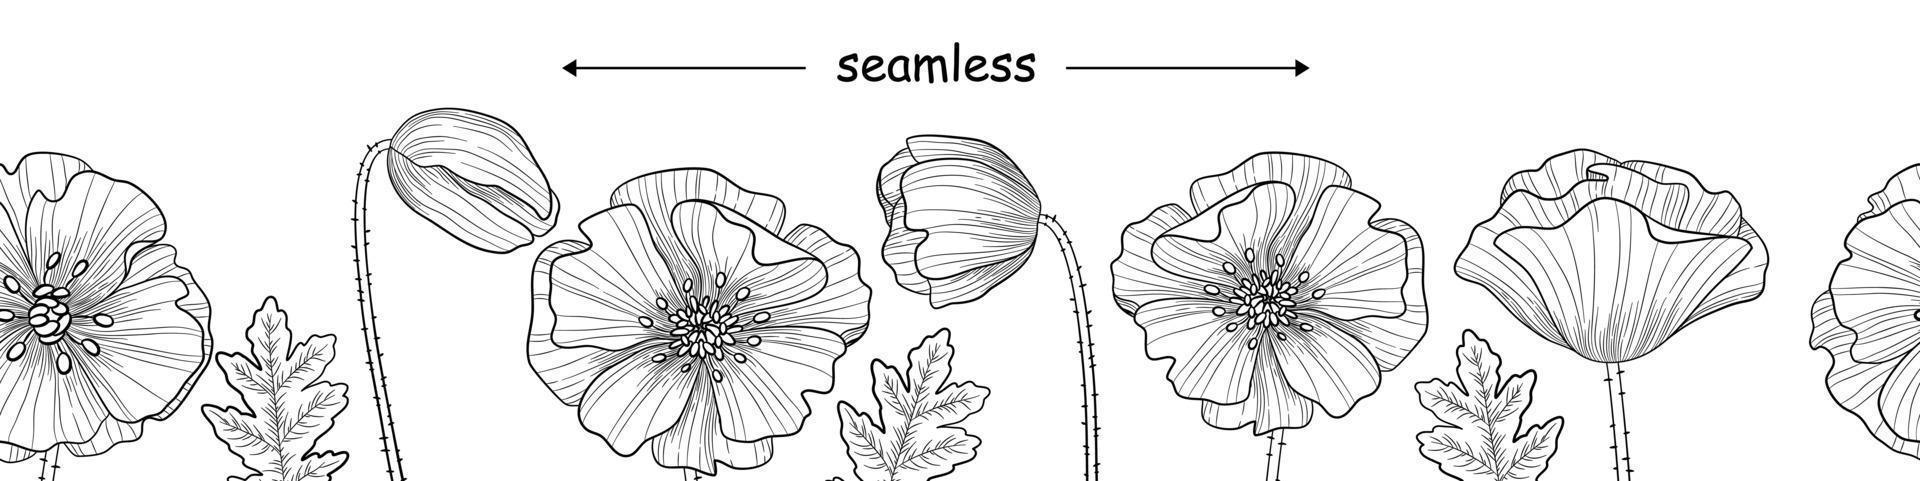 Seamless border banner with Poppies vector